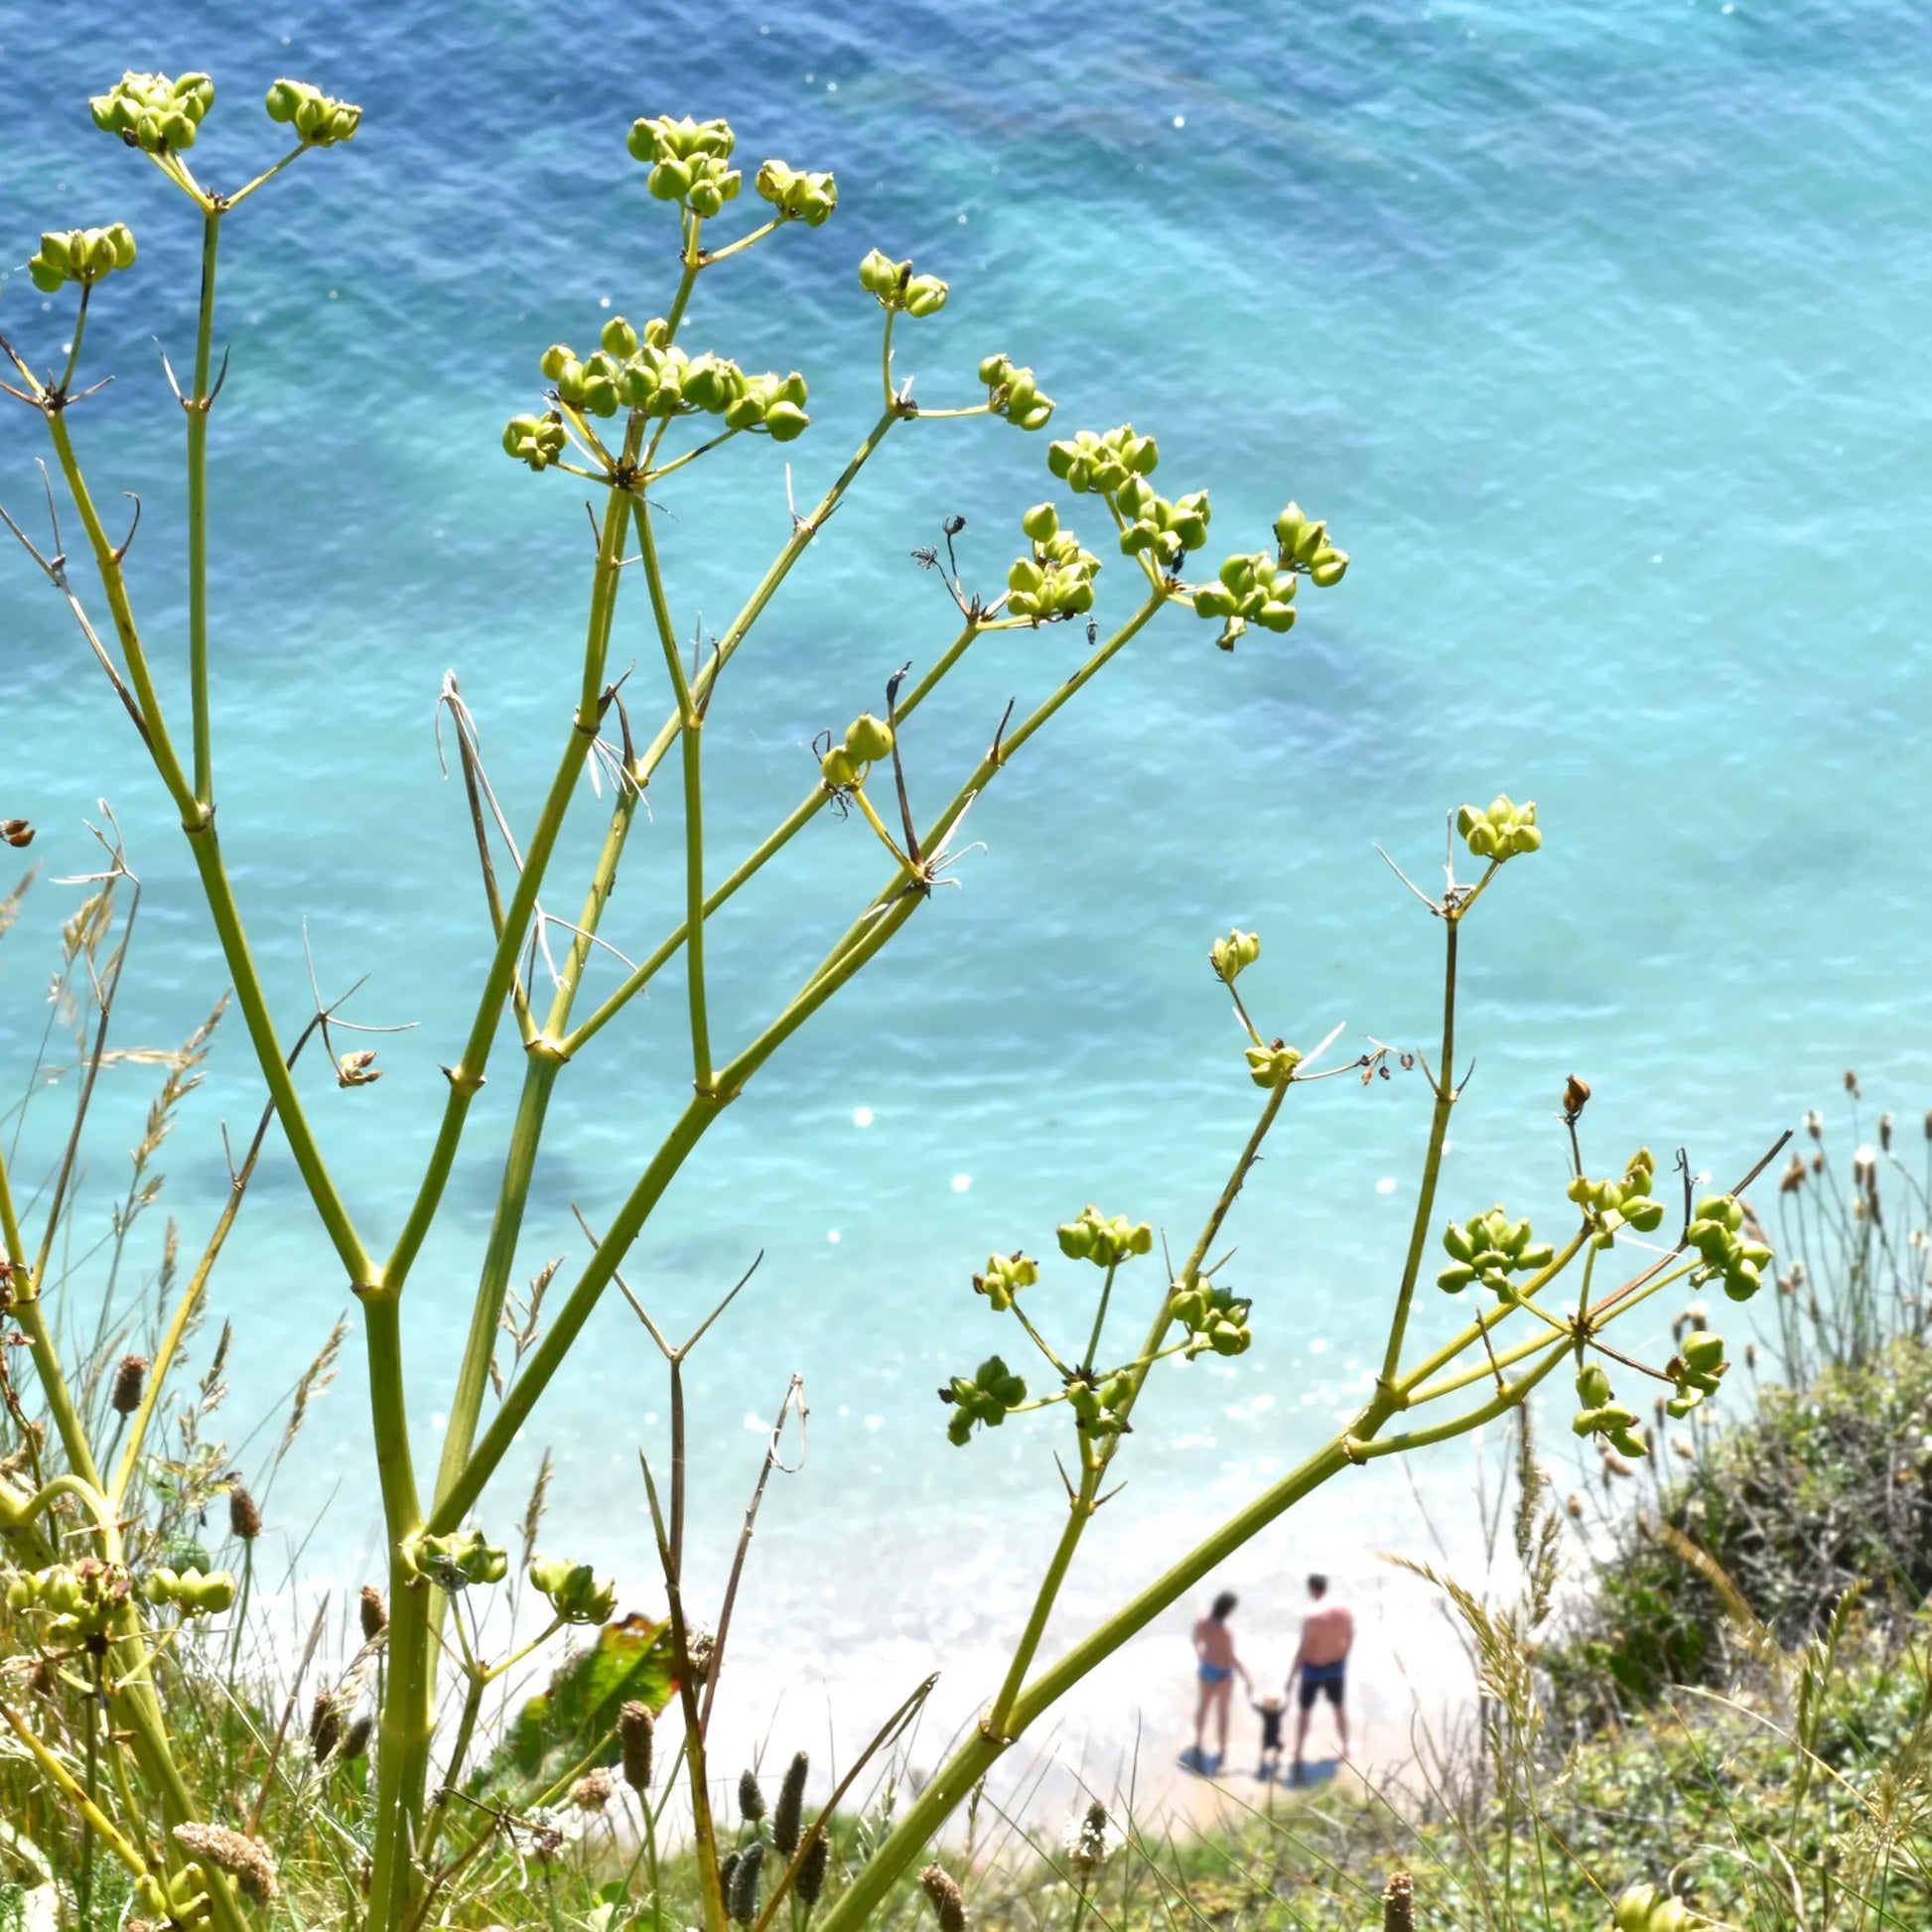 Cornish greetings card image of a Roseland beach.  Looking down to a small family ground through lime green seeds to aquamarine water and white sand